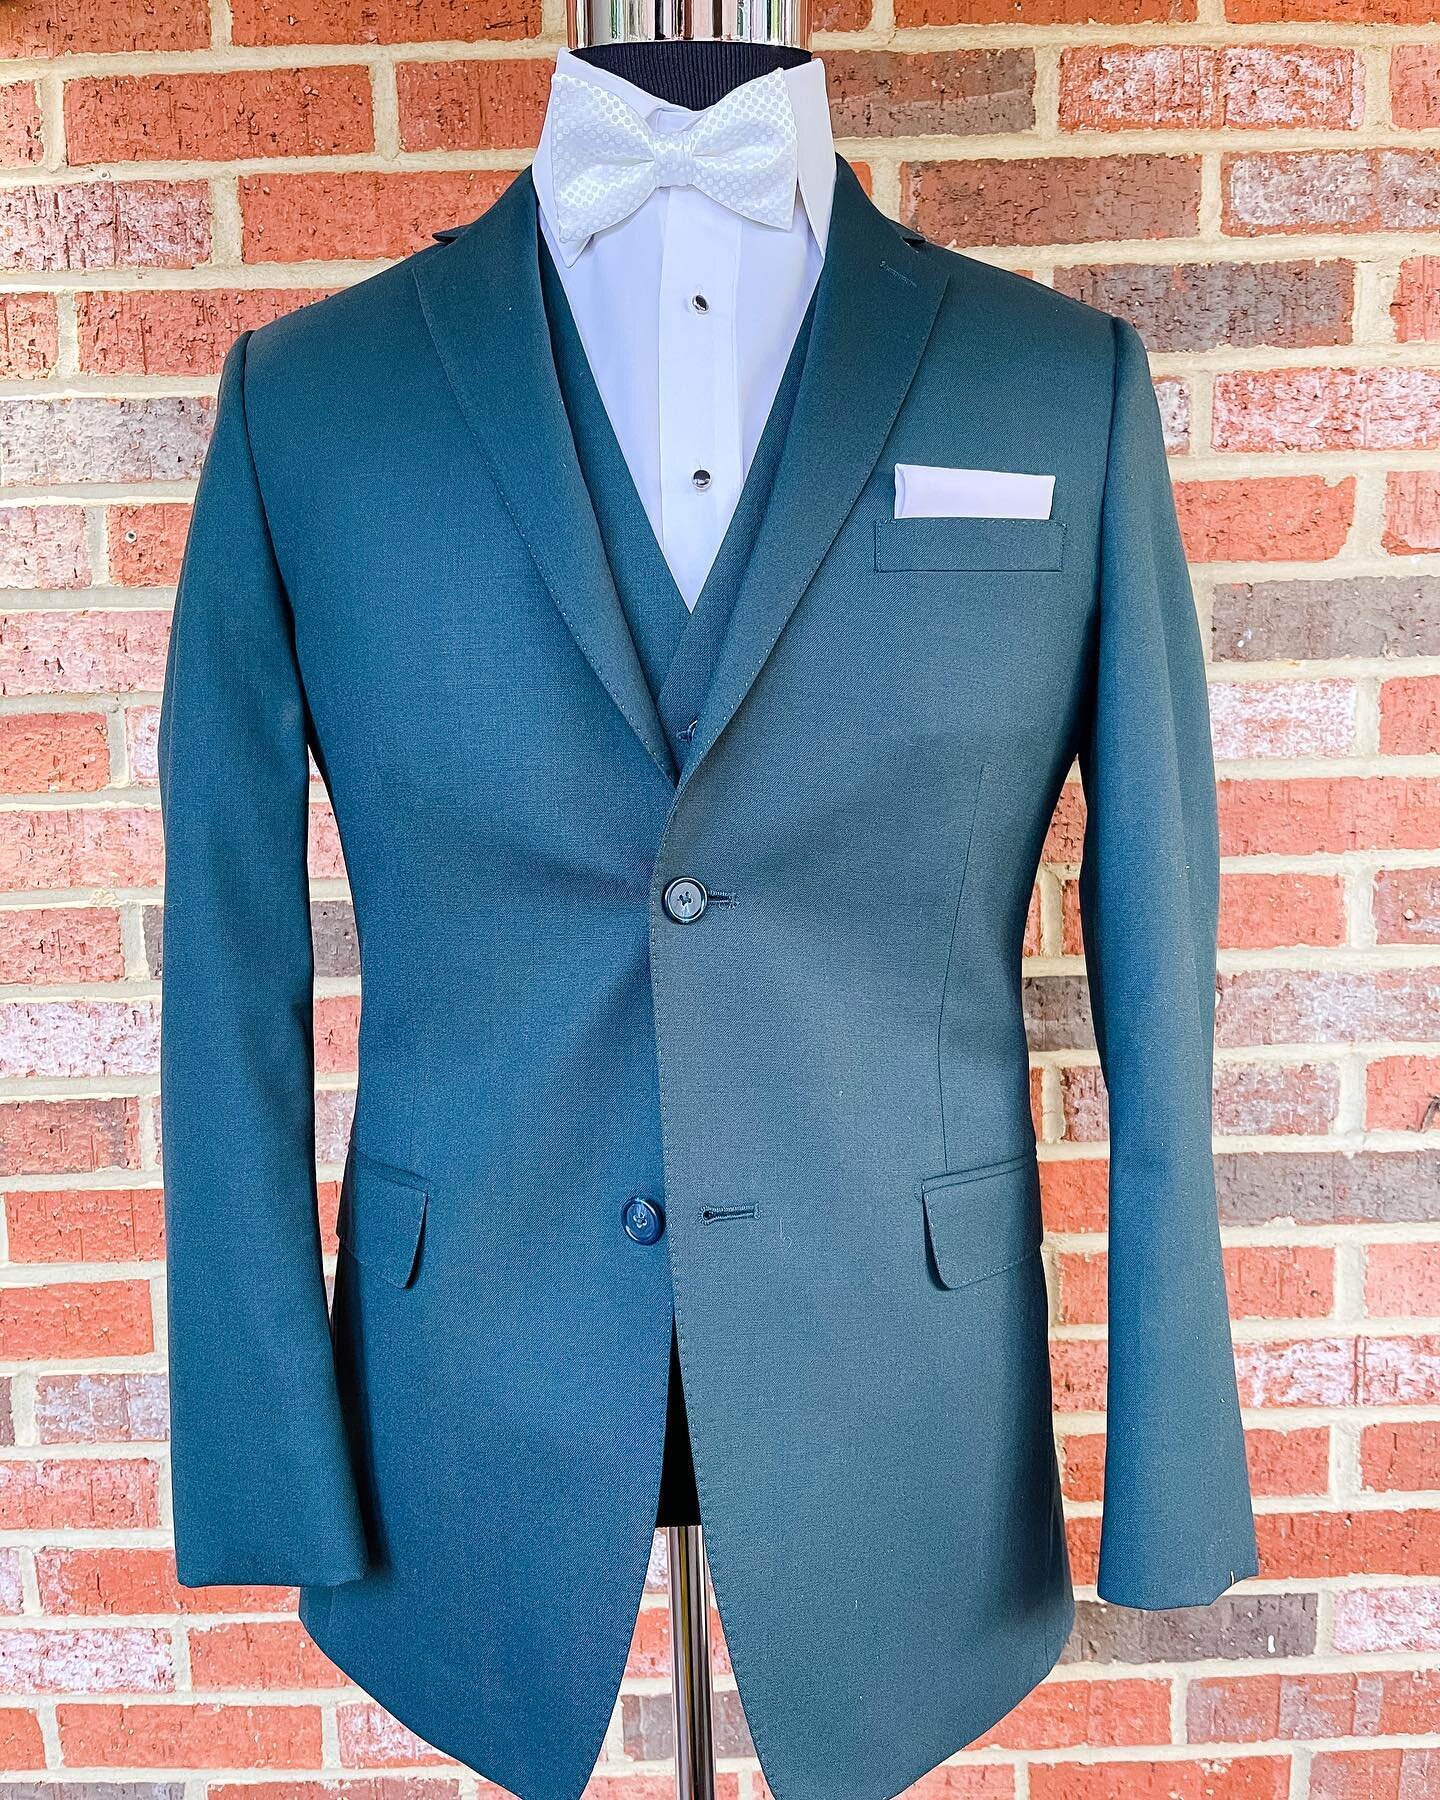 🌳 In honor of Earth Day 🌎 check out this beautiful hunter green suit.  Comes with matching trim fit pants and vest! 🌳 #AnnapolisBridalGroom #MarylandGroom